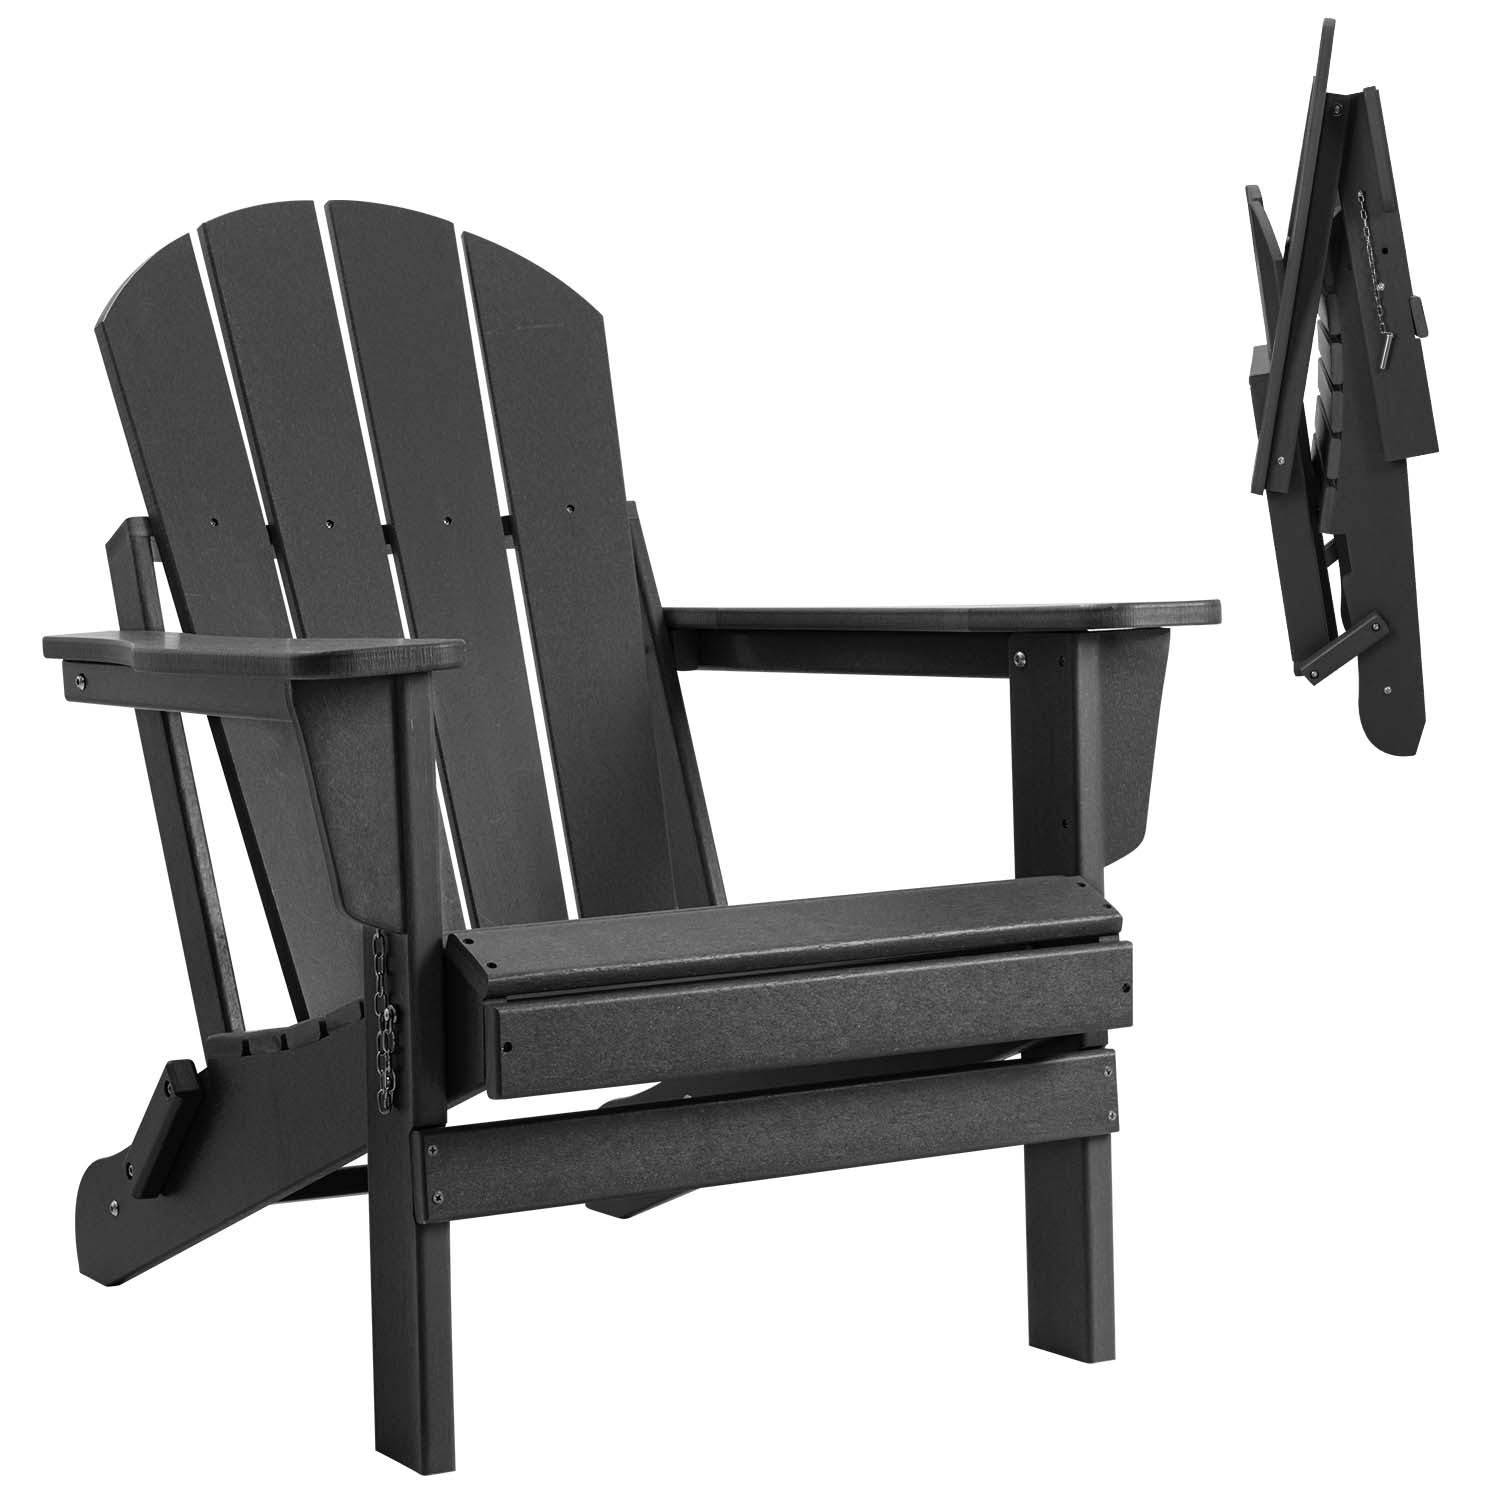 Devoko Folding Adirondack Chair HDPE Outdoor Lounge Chair Weather Resistant & Portable (One Chair Only), Black - image 2 of 7